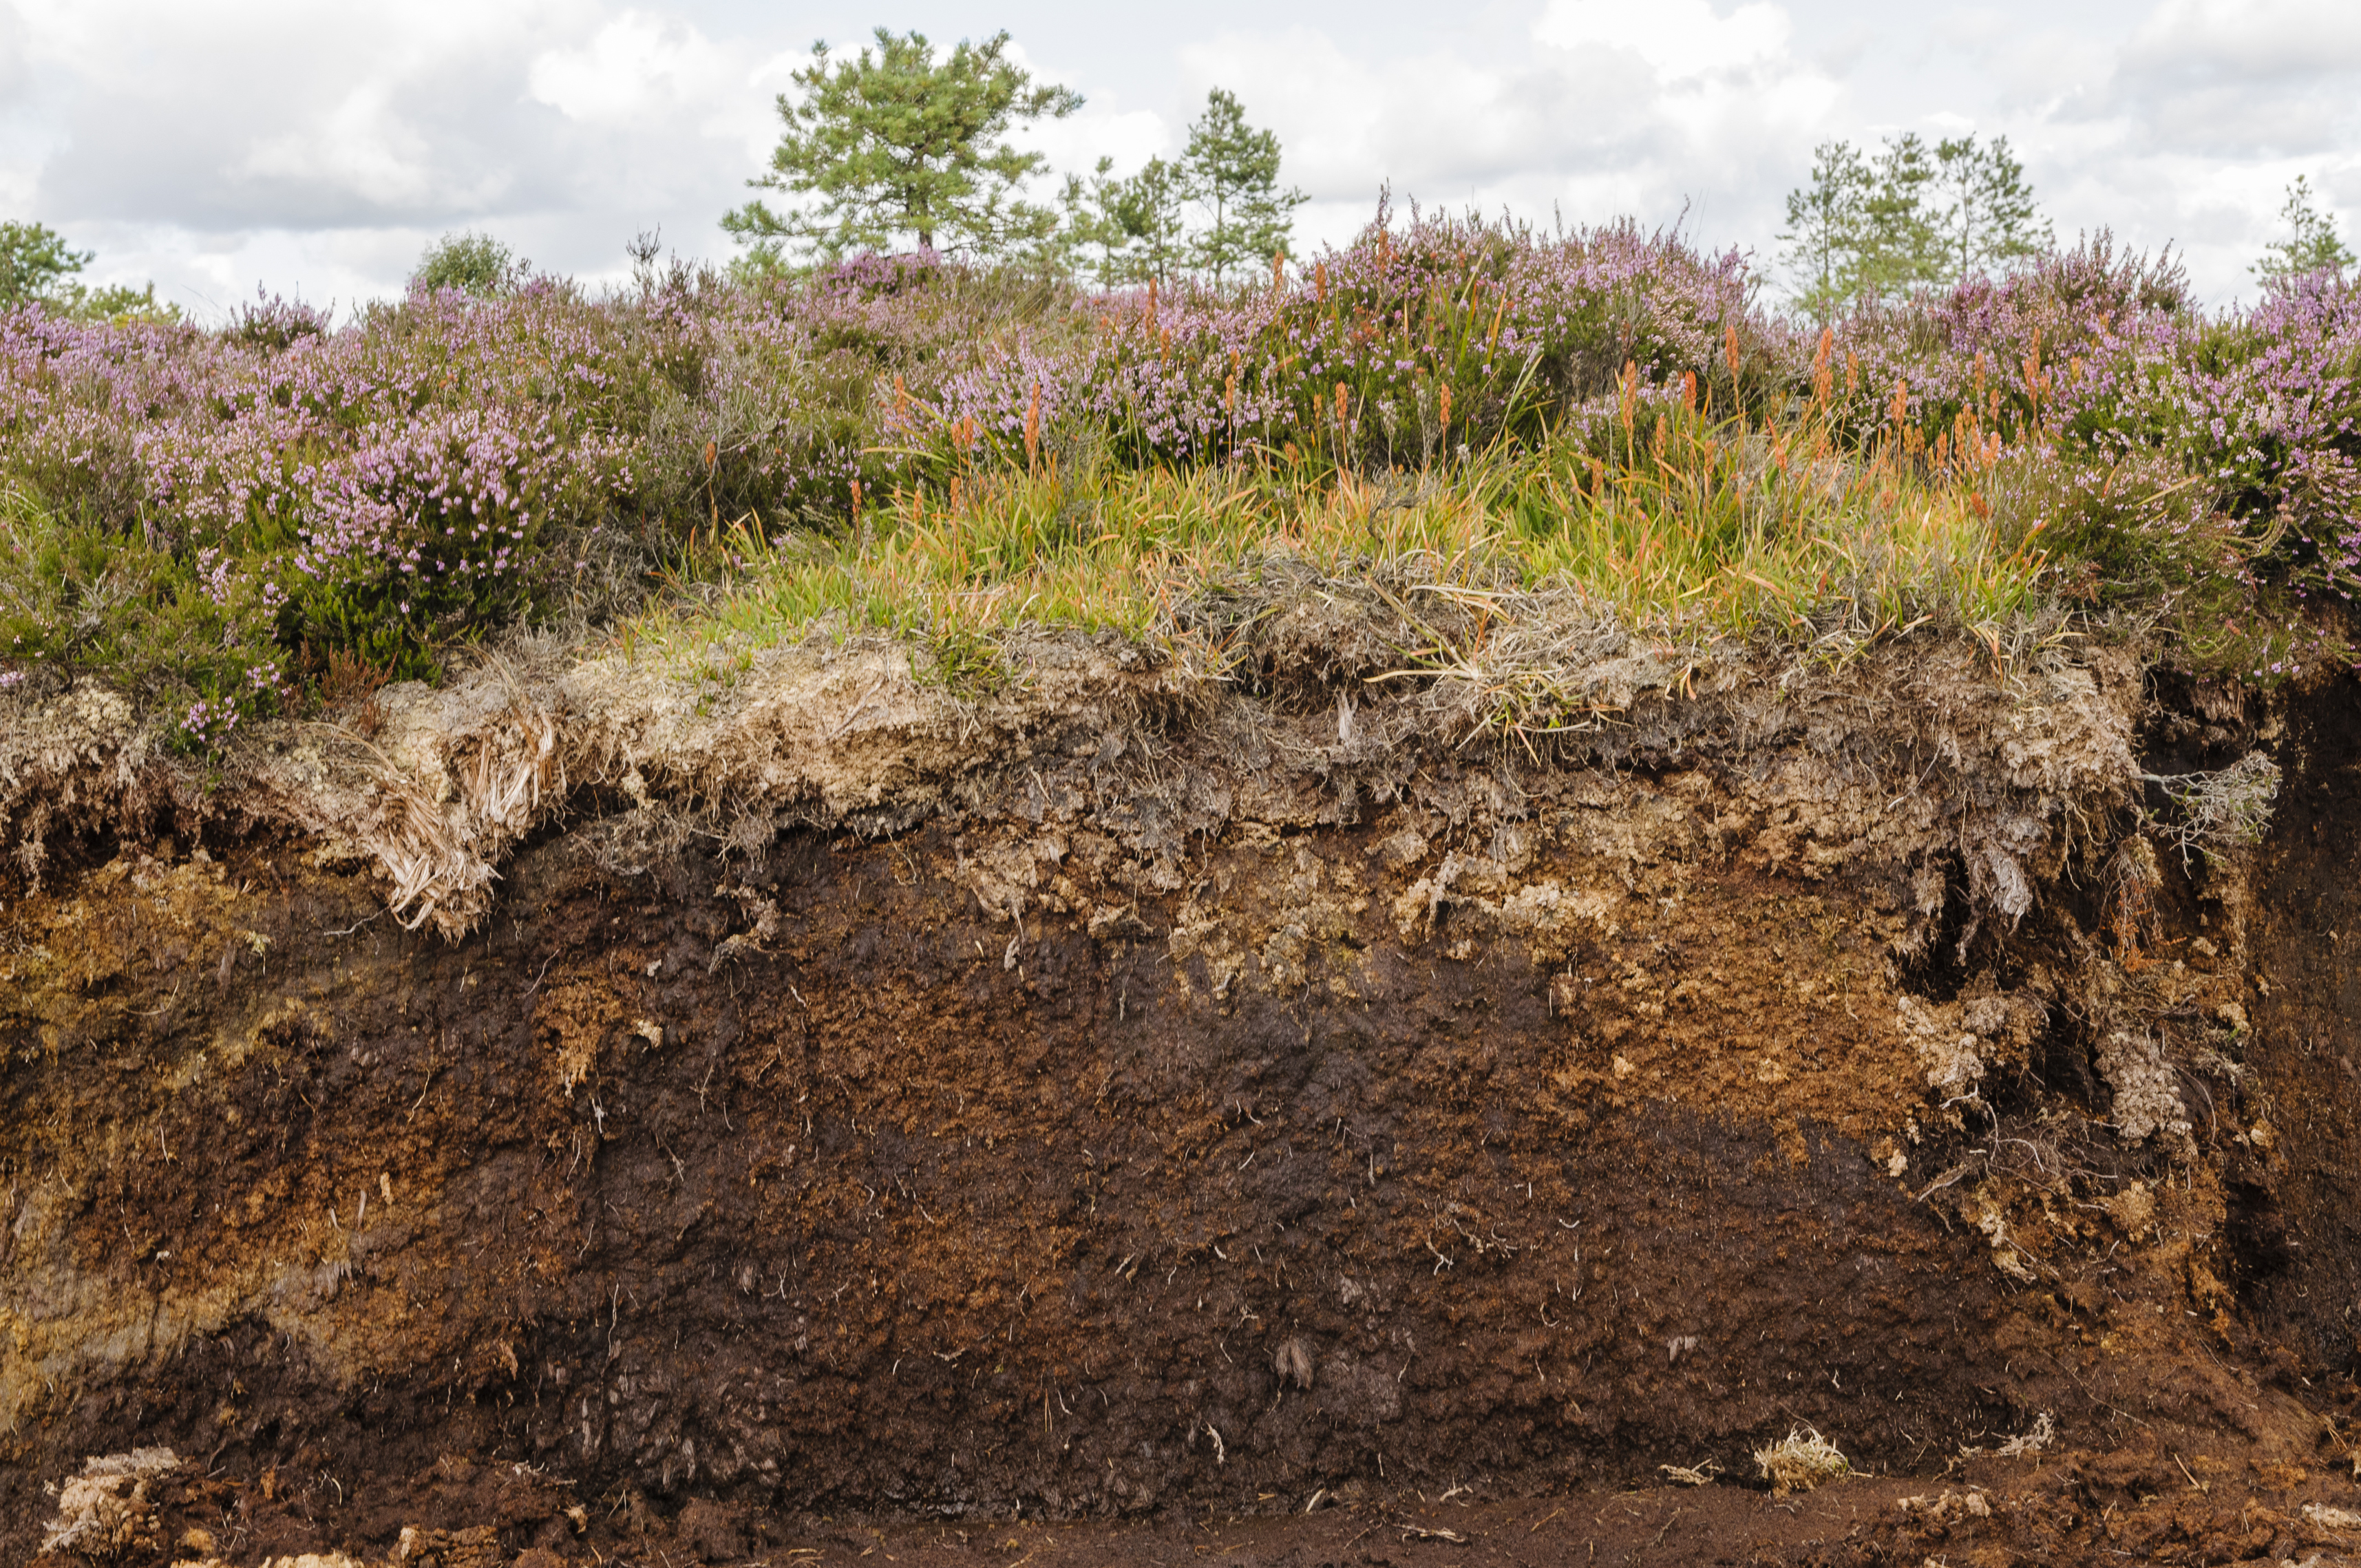 Peat is a declining rich source for plant growers (iStock/PA)